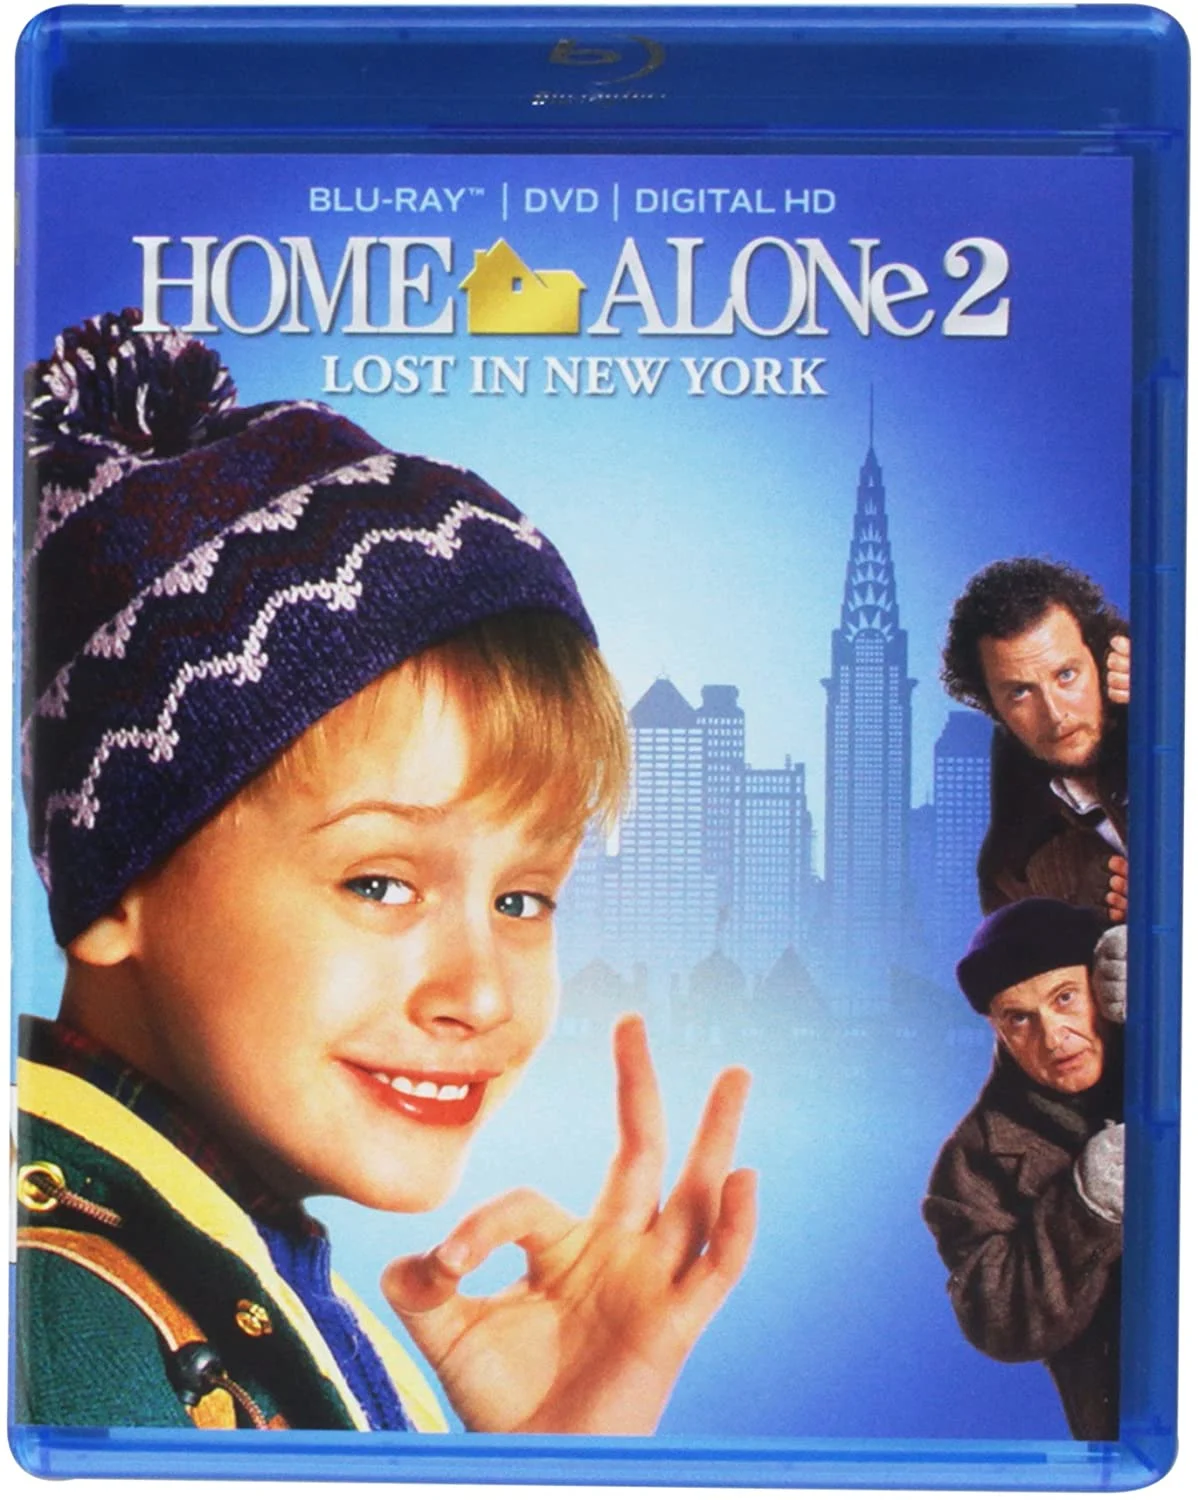 Home Alone 2: Lost in New York (Blu-ray) on MovieShack